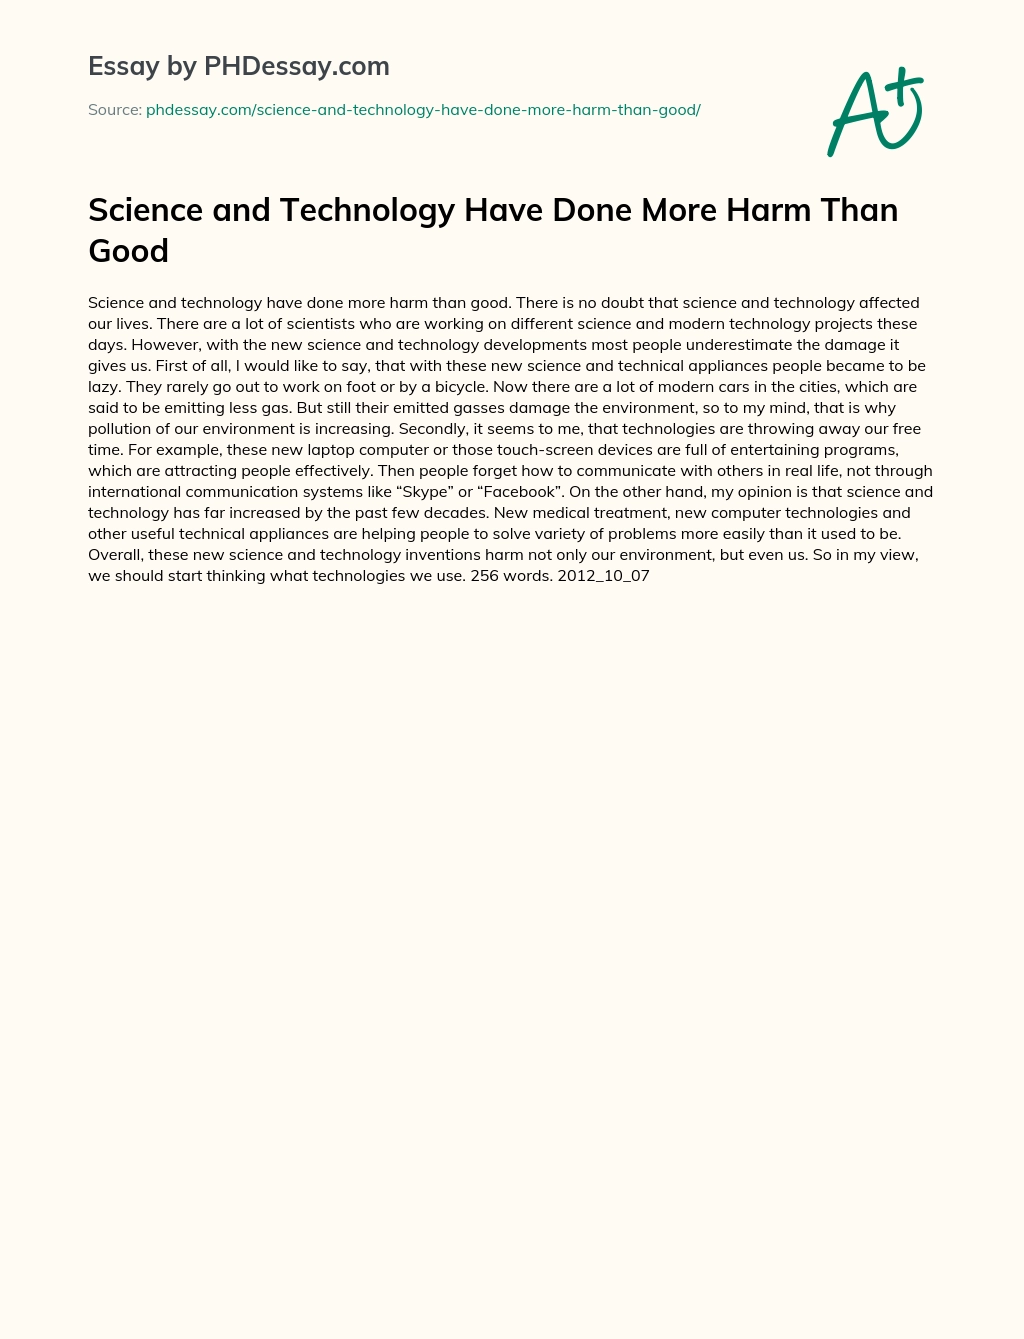 Science and Technology Have Done More Harm Than Good essay